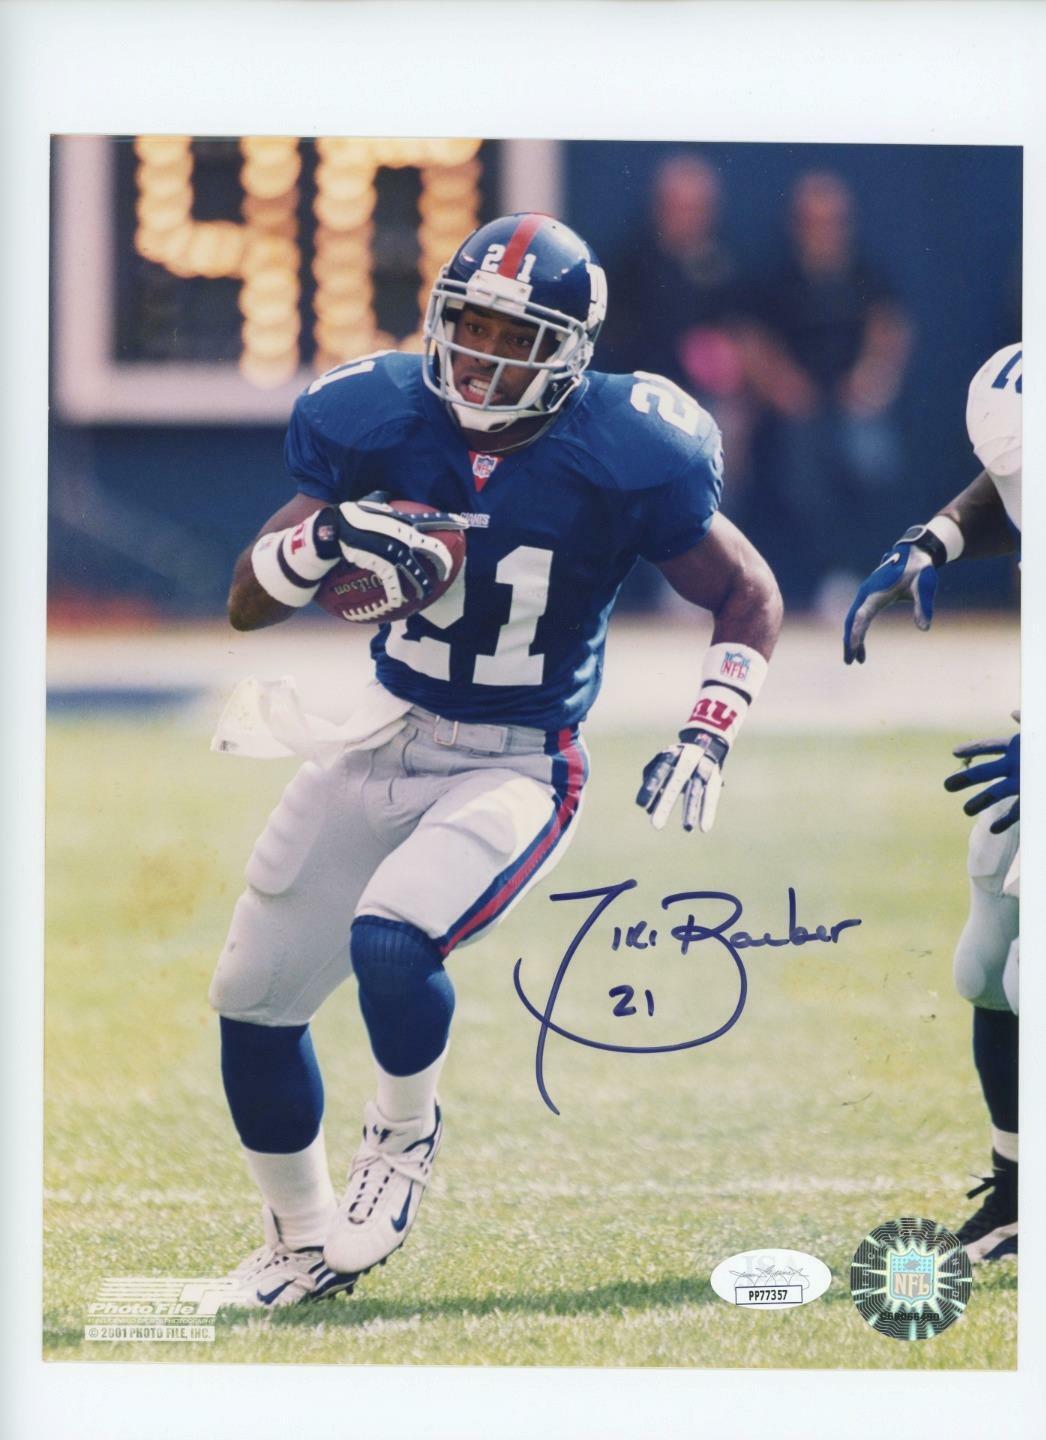 Tiki Barber New York Giants Signed Autographed 8x10 NFL Photo Poster painting JSA COA #2